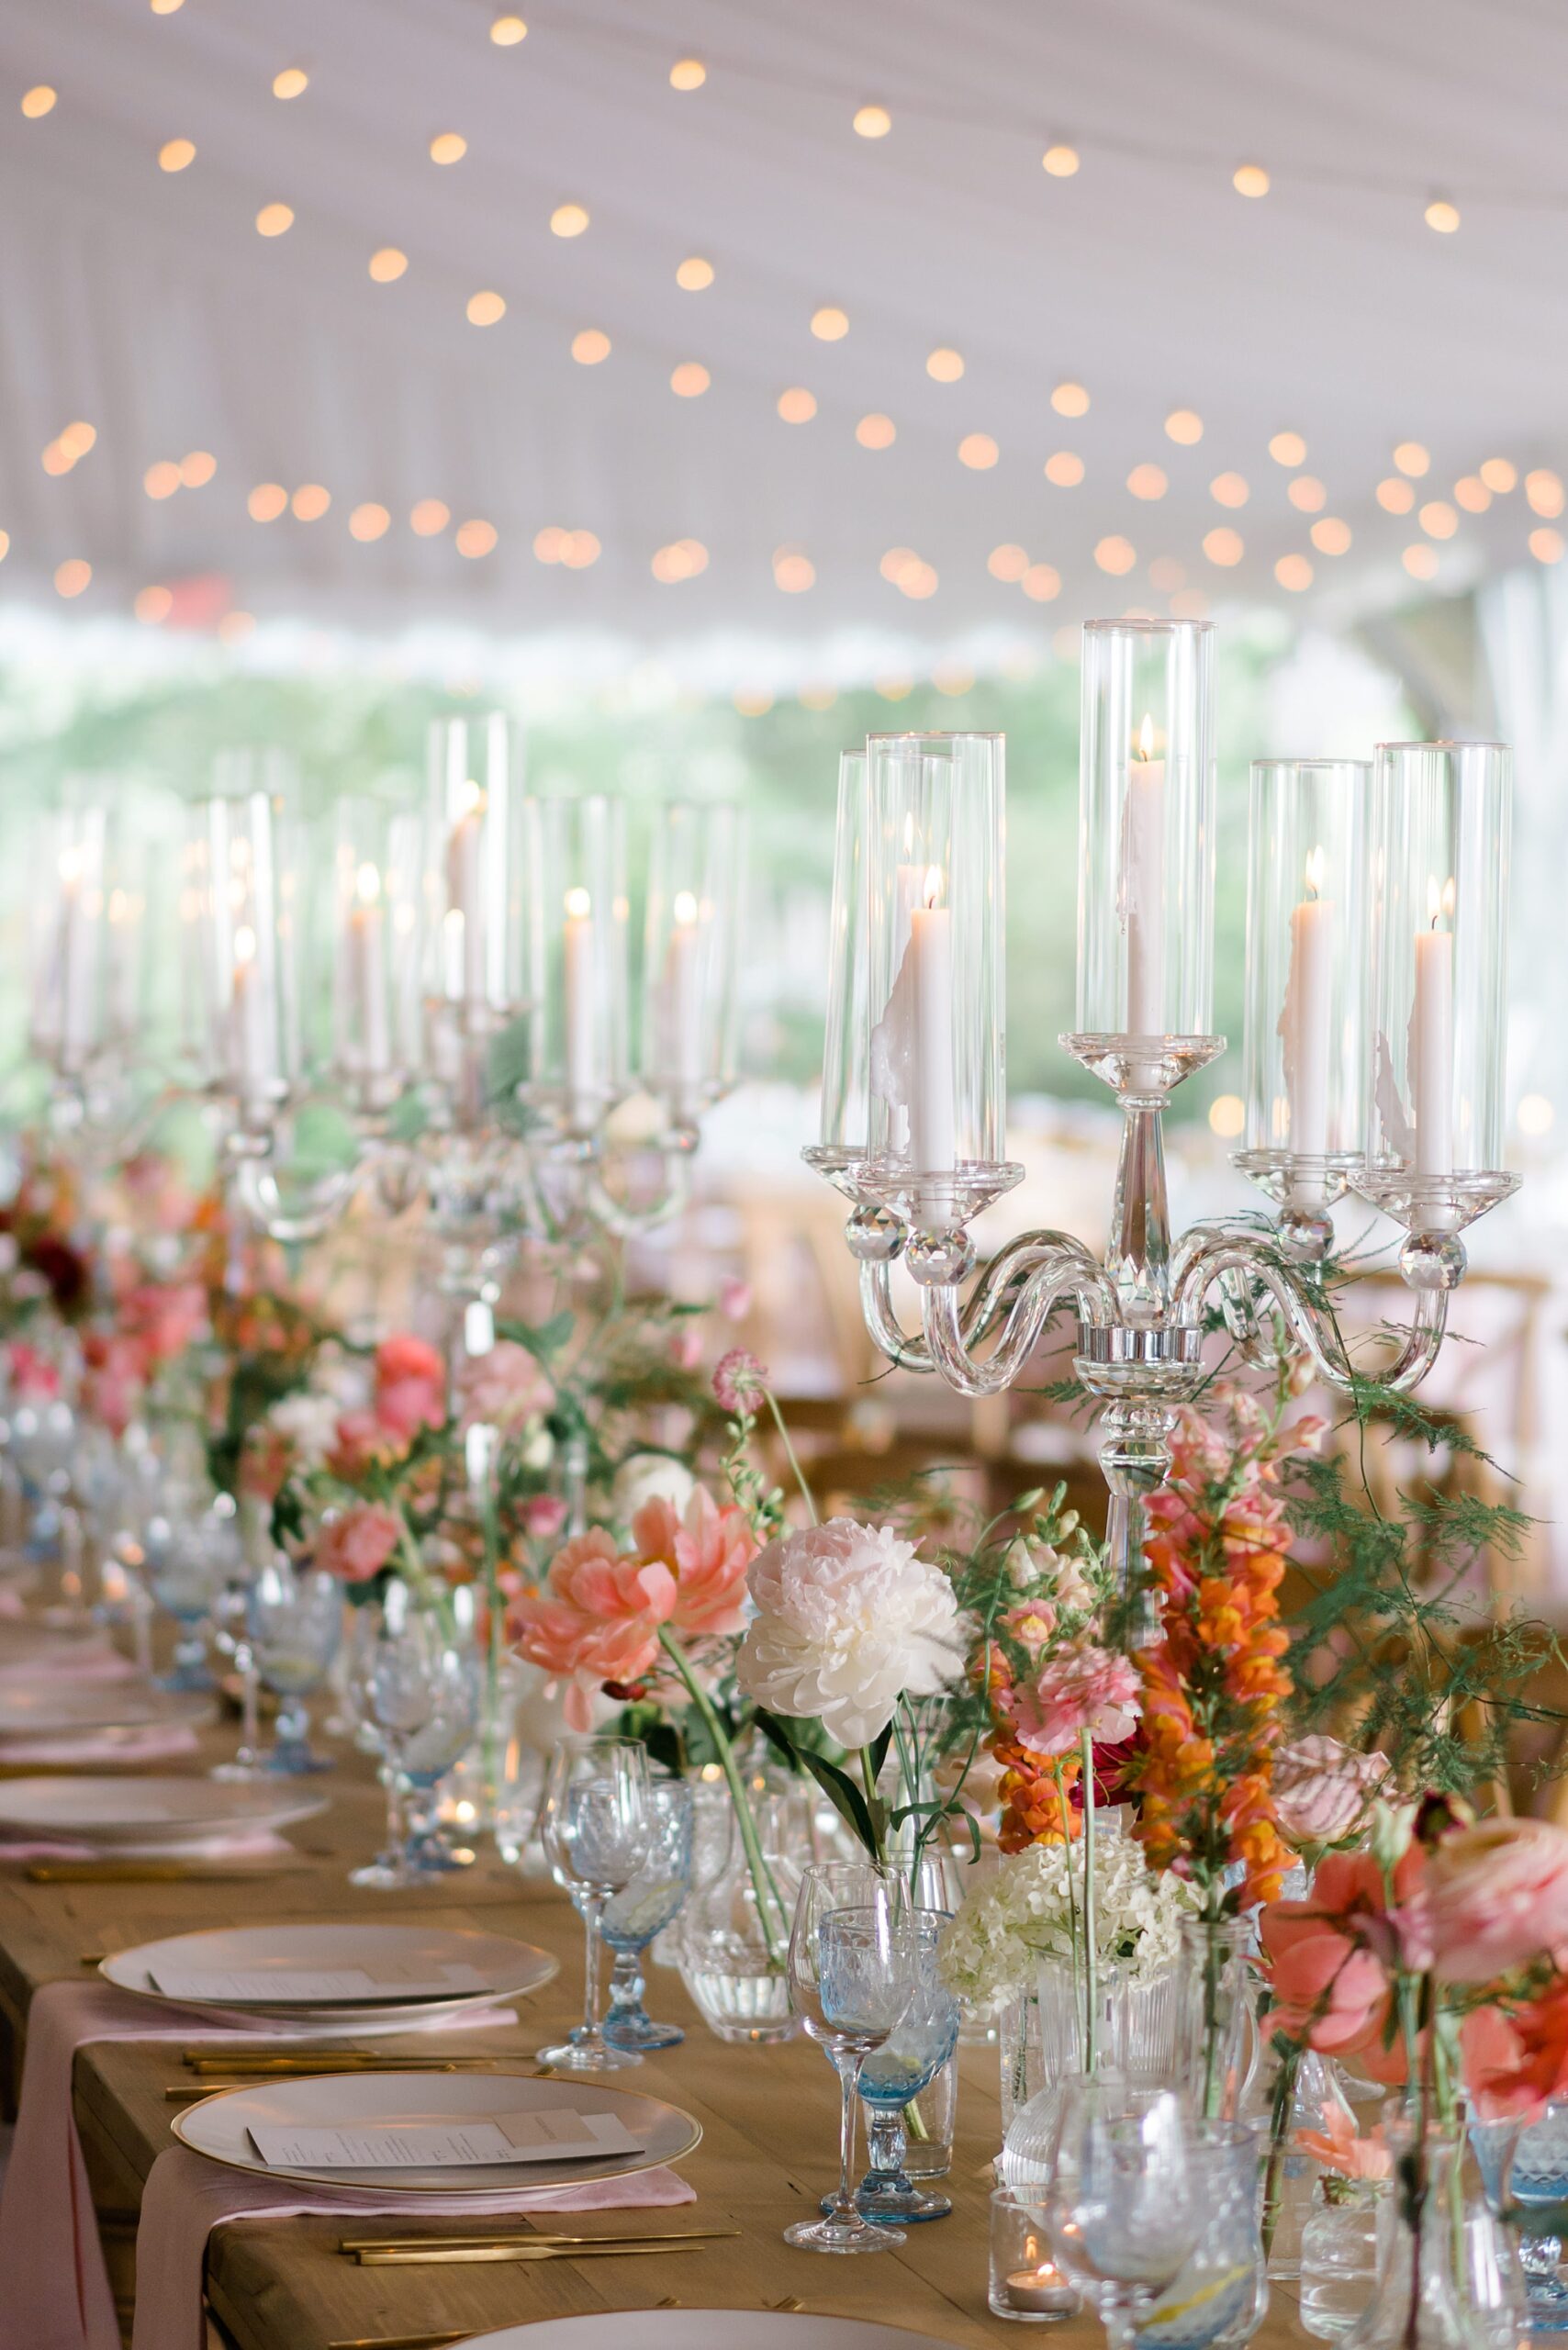 floral centerpieces and white candles in clear candle holders 